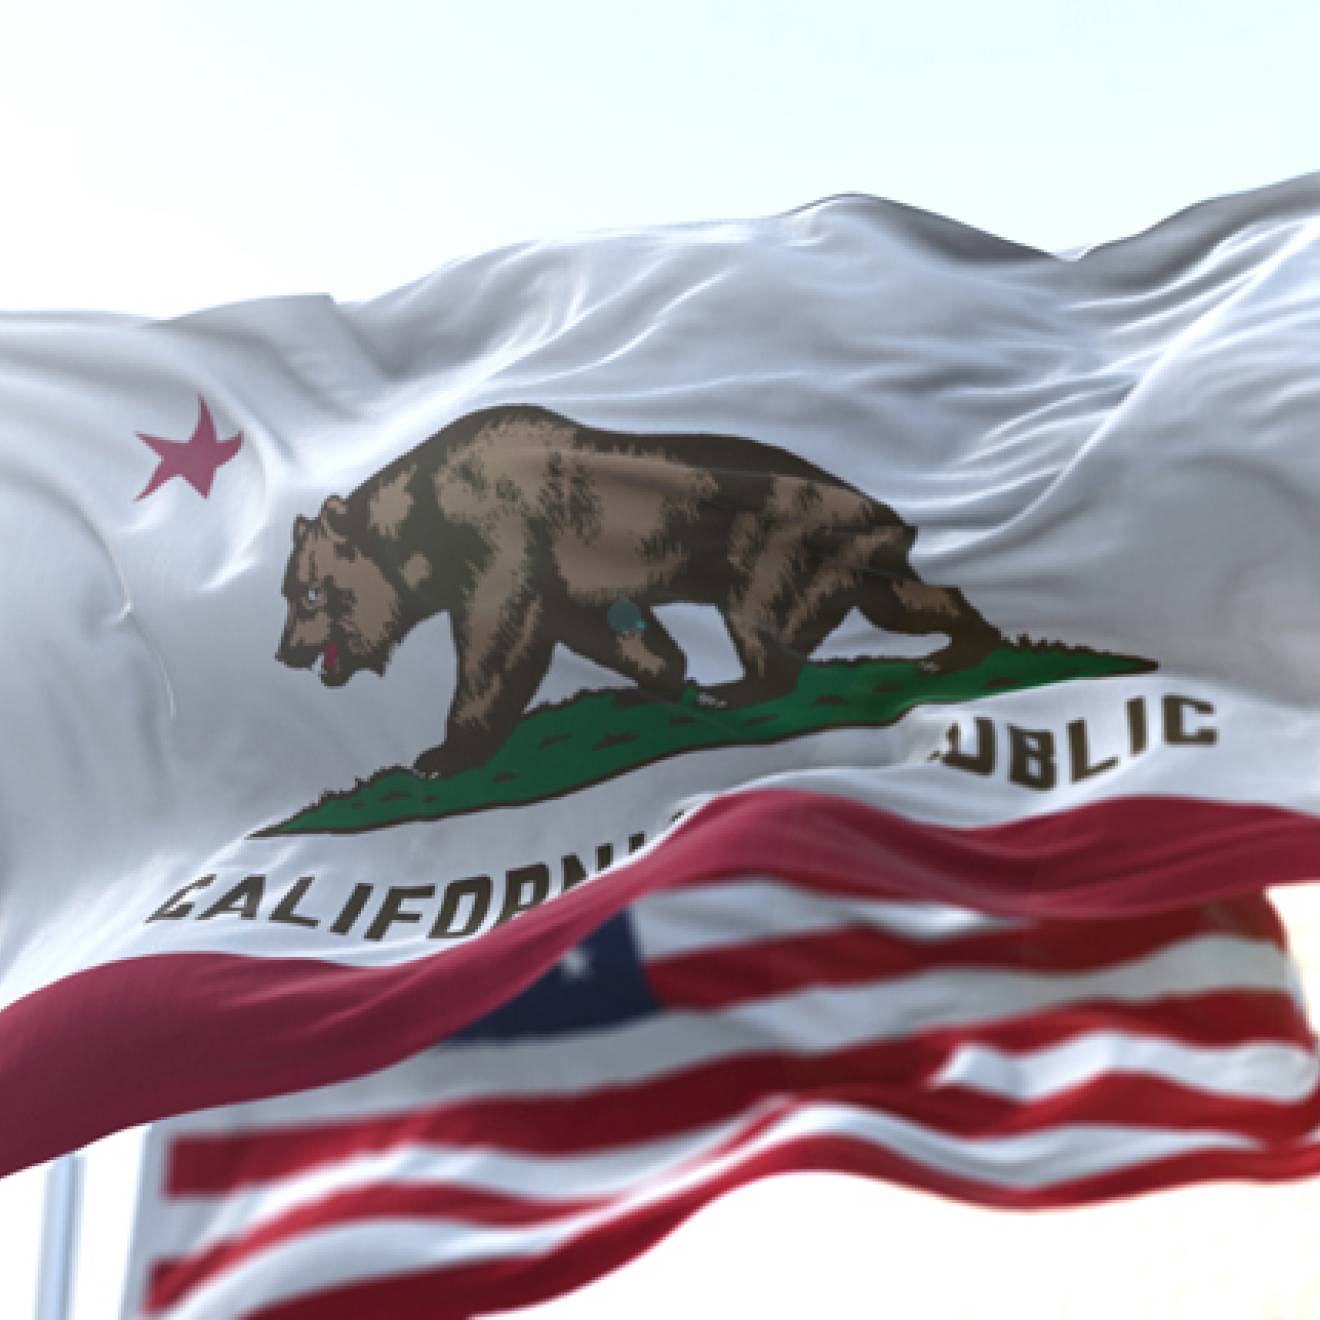 State of California flag flying in the wind.